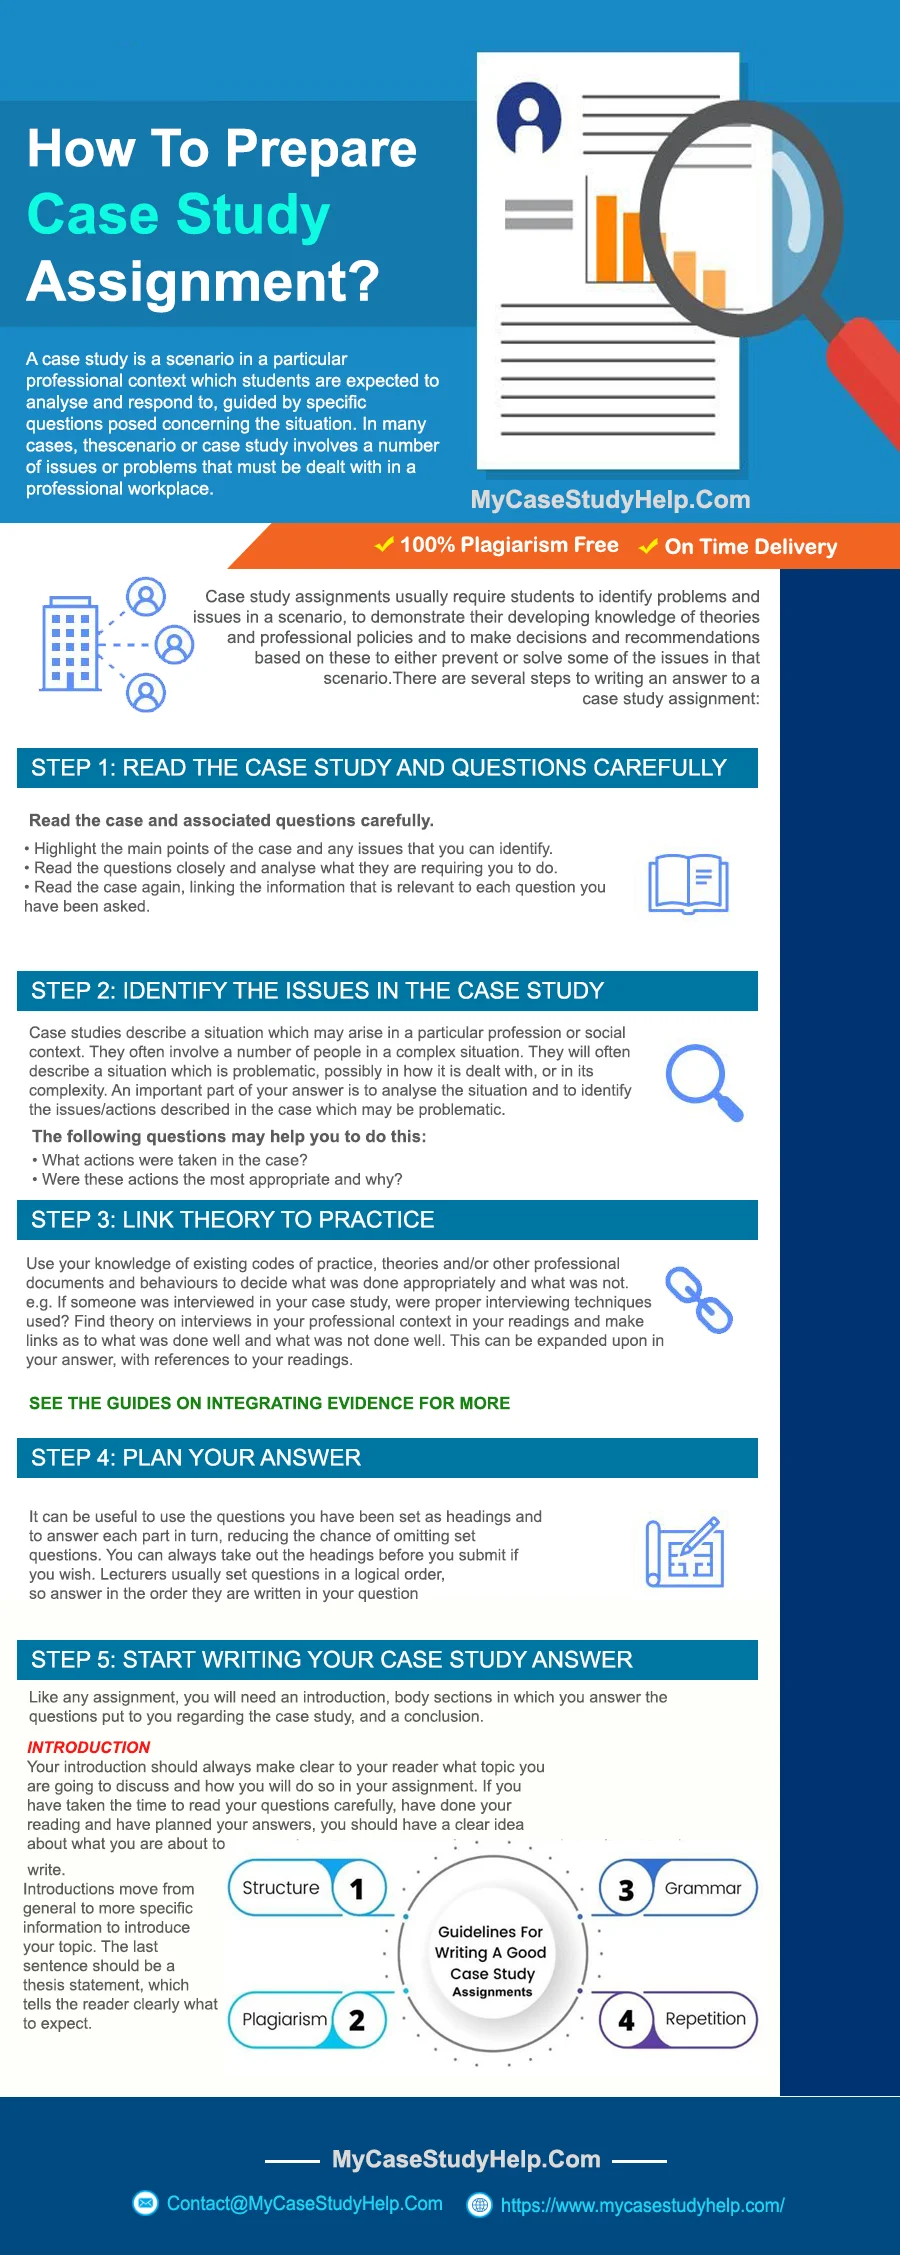 How To Prepare A Case Study Assignment